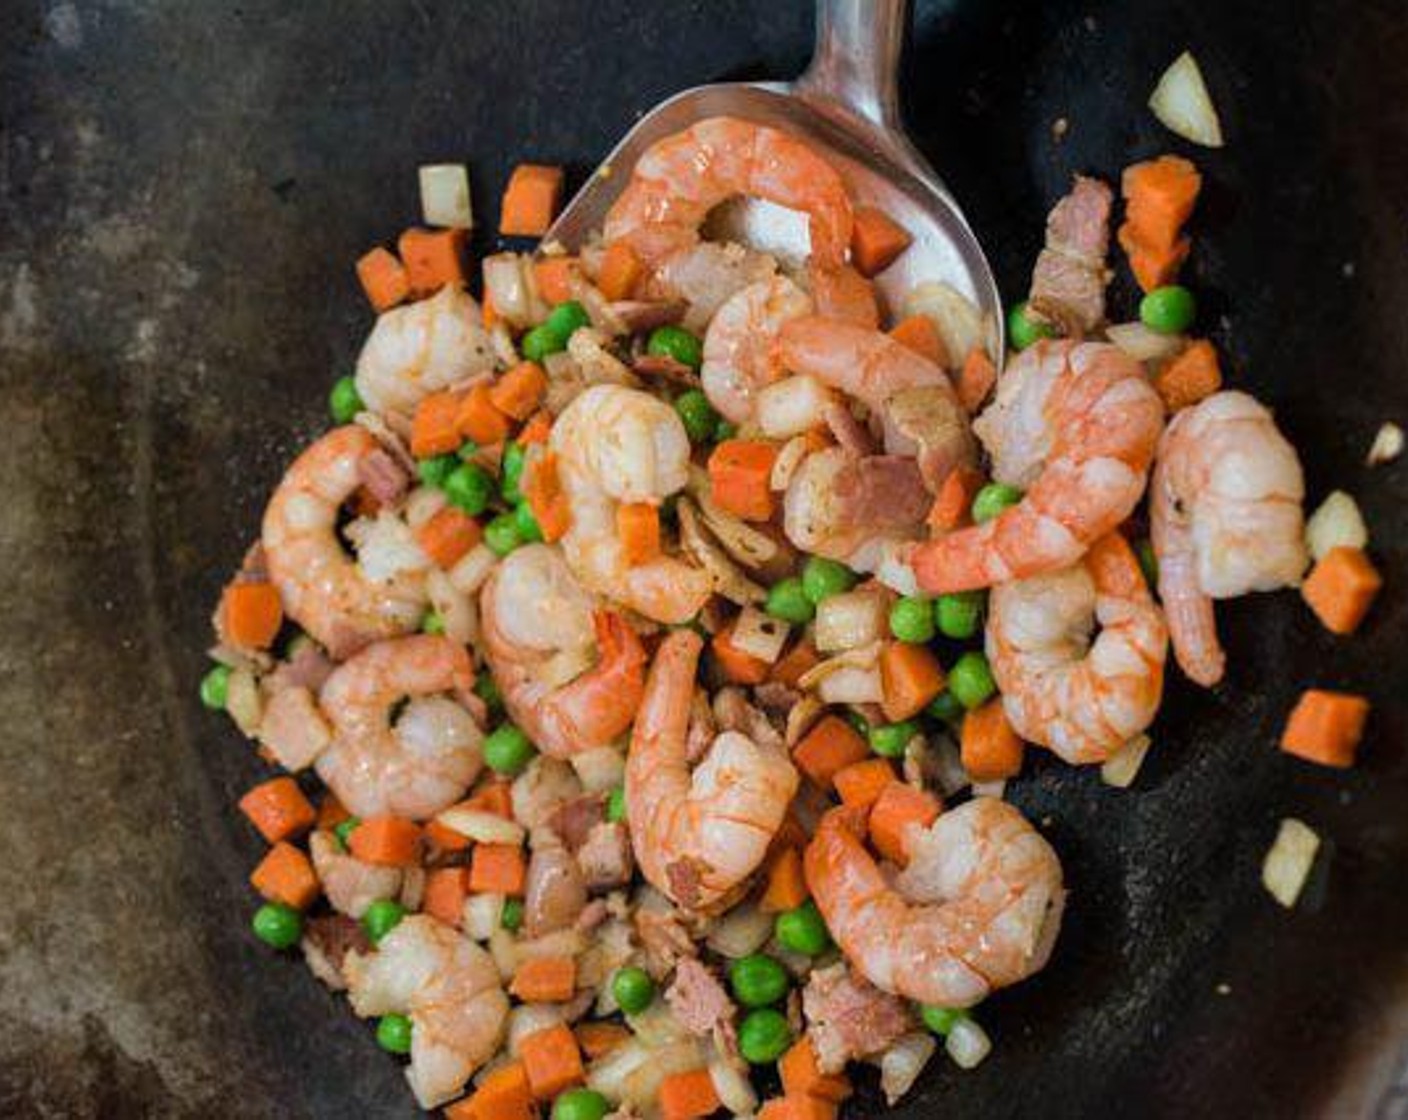 step 6 Add the Medium Shrimp (8 oz) to the wok. Stir-fry until cooked (this should take less than 1 minute).